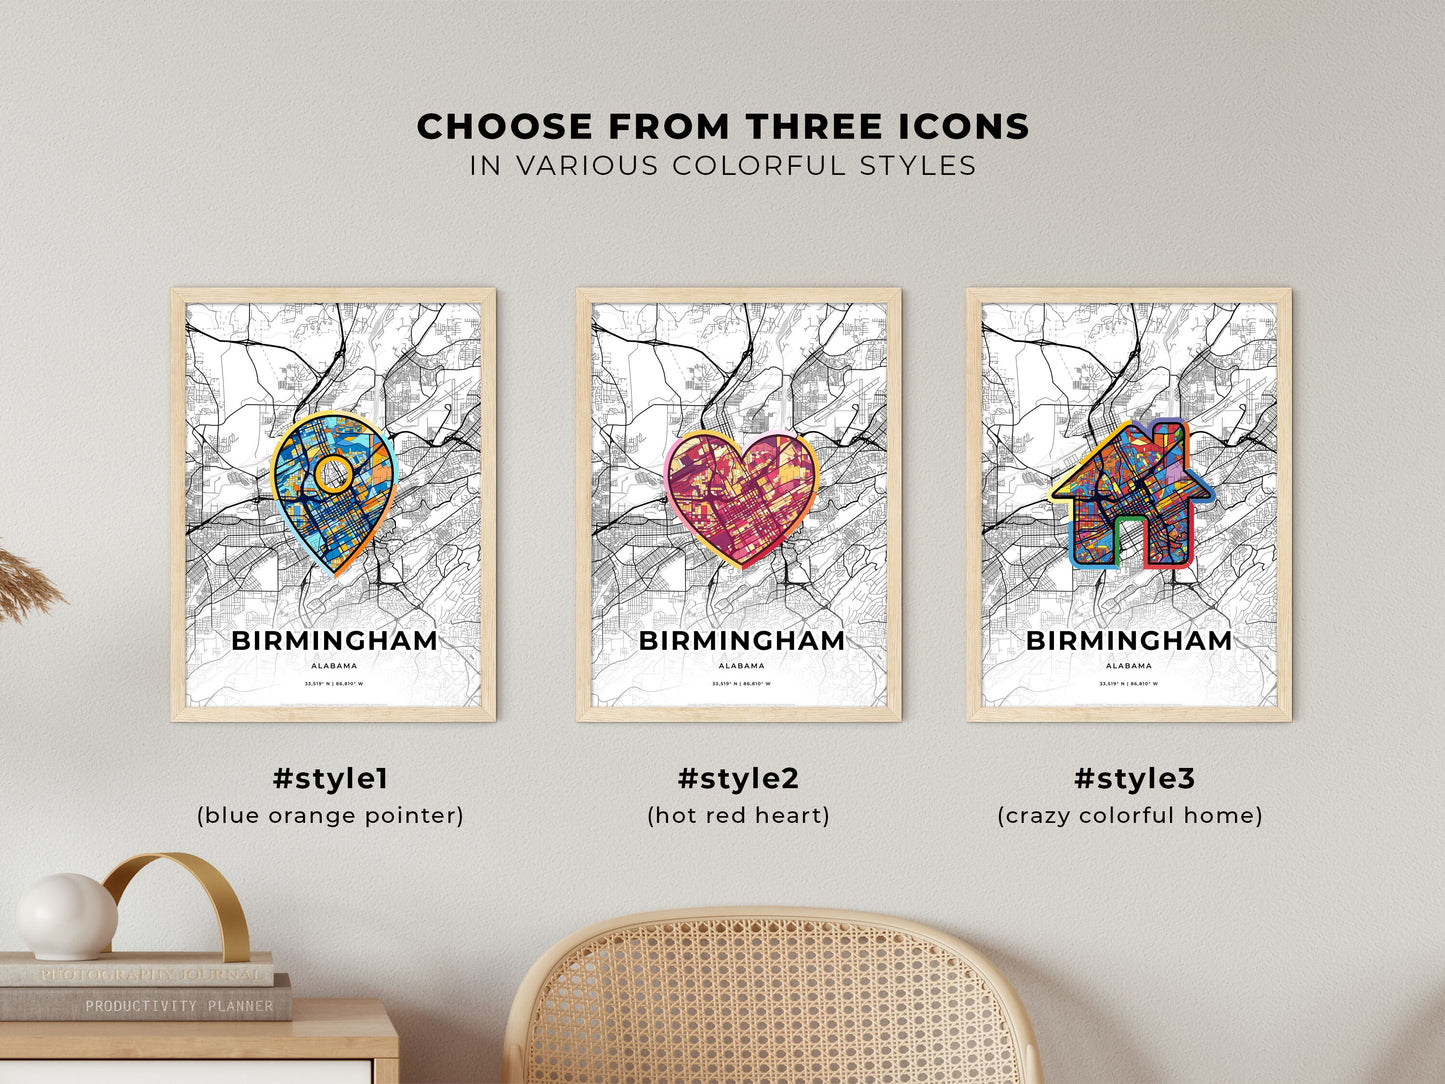 BIRMINGHAM ALABAMA minimal art map with a colorful icon. Where it all began, Couple map gift.